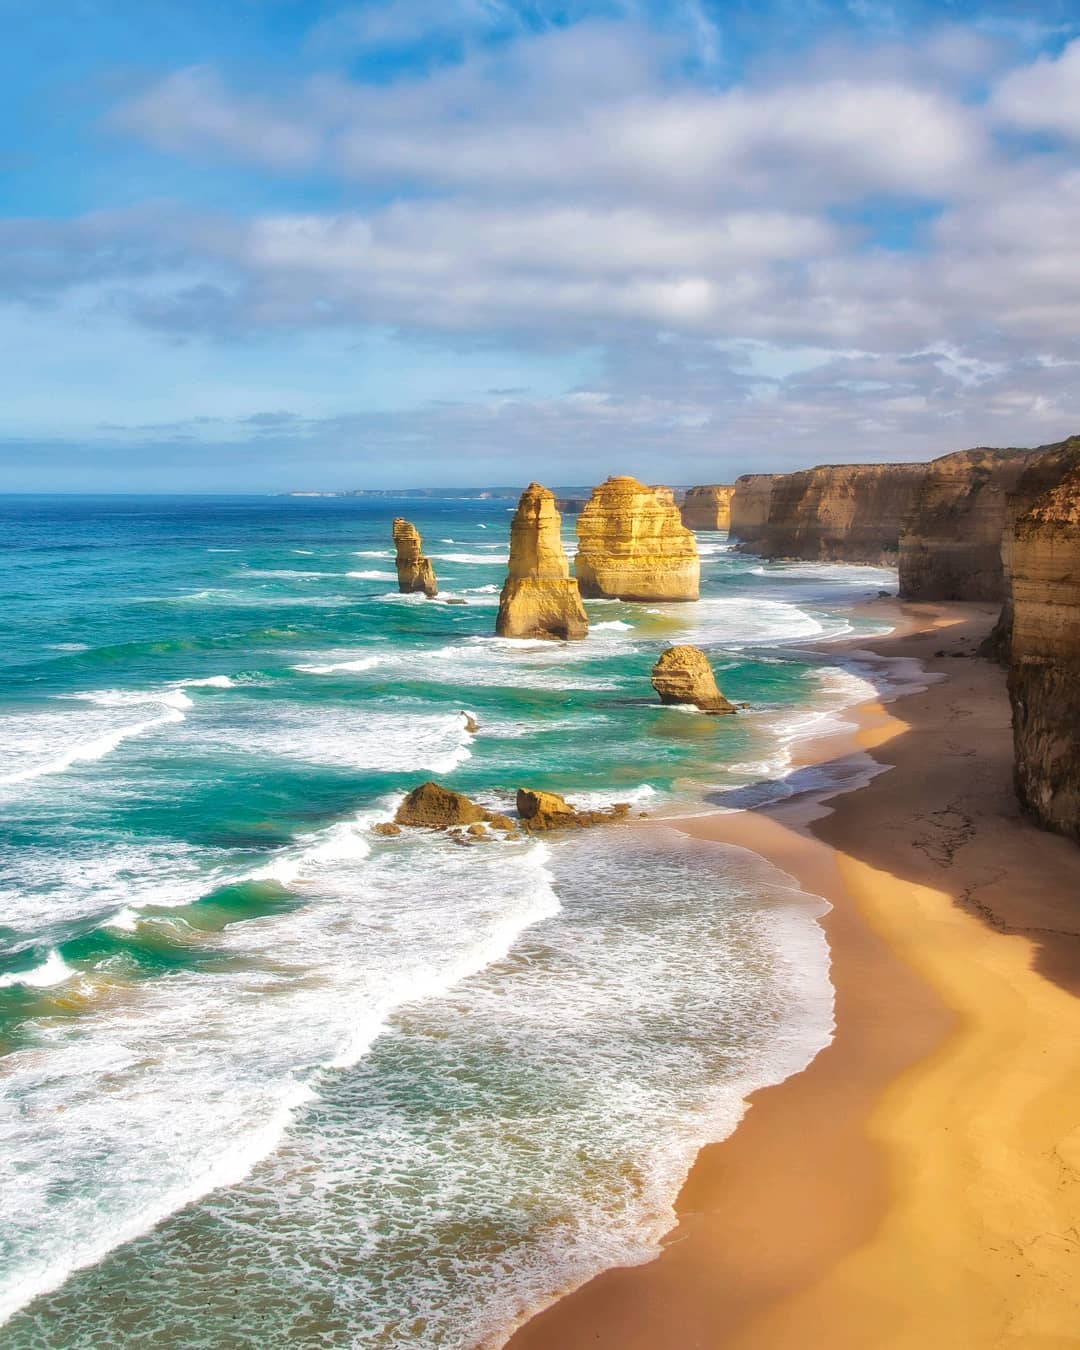 The rugged rock stacks of the iconic 12 Apostles along Australia's famous Great Ocean Road – one of the world’s most scenic coastal drives and one of @lonelyplanet’s Epic Drives of the World. ⠀
⠀
Located near Port Campbell and within the Port Campbell National Park in Australia, the giant limestone stacks tower 45m (148ft) above the tempestuous ocean below. Behind the eight remaining stacks (the others are said to have collapsed) are lines of imposing 70m (230ft) high cliffs.⠀
-⠀
-⠀
-⠀
-⠀
-⠀
-⠀
#gor #seegor #twelveapostles #12apostles #portcampbell #greatoceanroad #VictoriaAustralia #seevictoria #visitvictoria  #PortCampbellNationalPark  #roadtripaustralia #driveaustralia #seeaustralia #lppathfinders #lonelyplanet